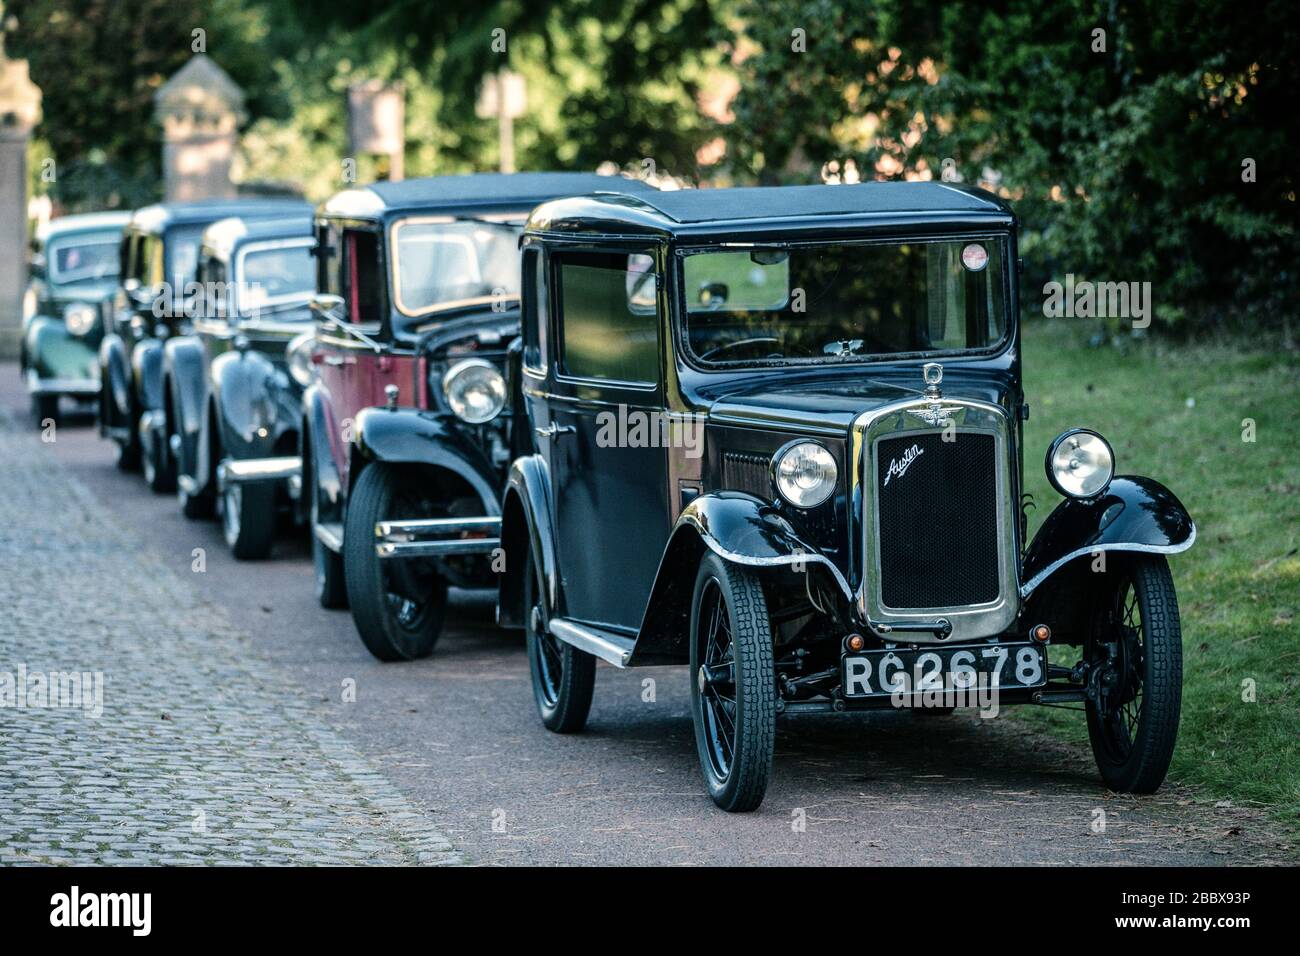 A line of vintage motor cars headed by a 1932 Austin Seven RN BOX SALOON RG 2678, Papplewick Pumping Station 1940's event, England Stock Photo